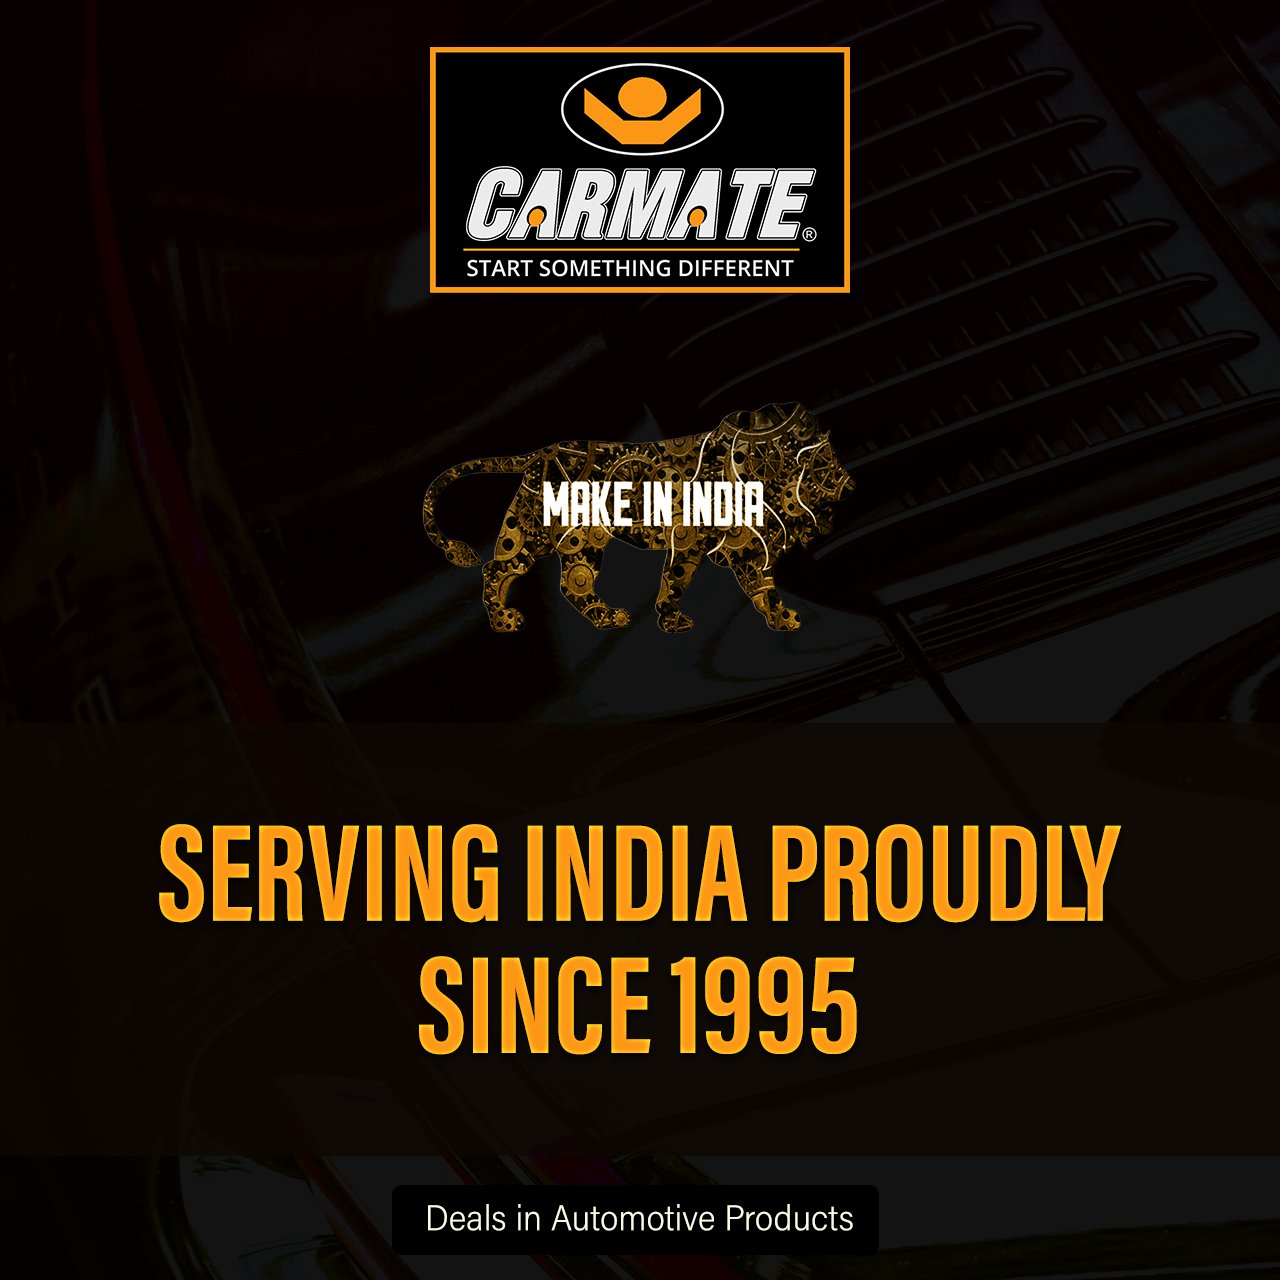 Carmate Car Steering Cover Ring Type Sporty Grip (Black and Camel) For Tata - Indica Vista (Medium) - CARMATE®